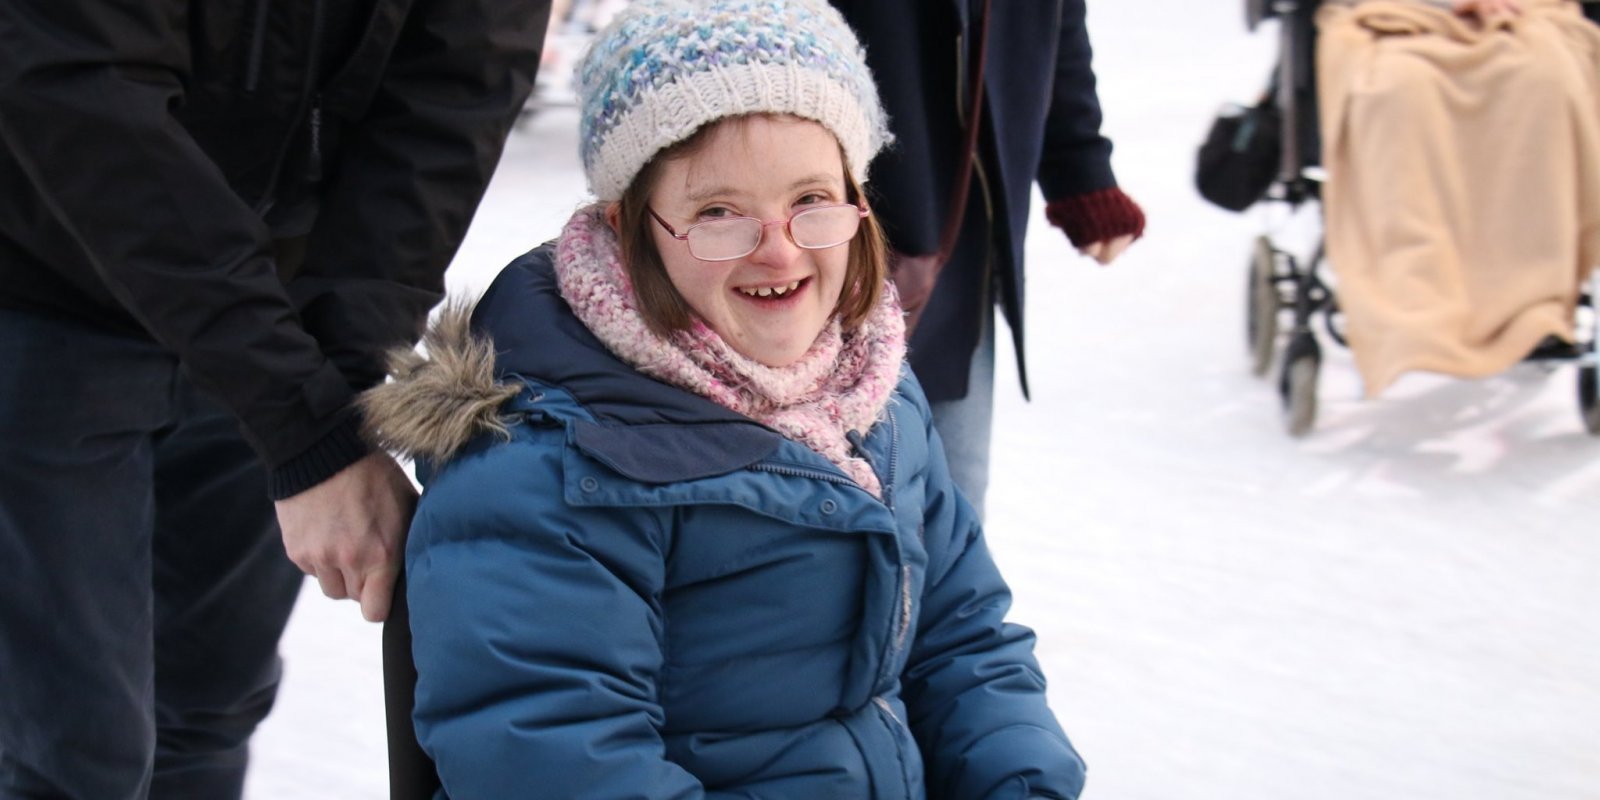 Cathers sat in wheelchair smiling with hat coat and glasses on on ice rink